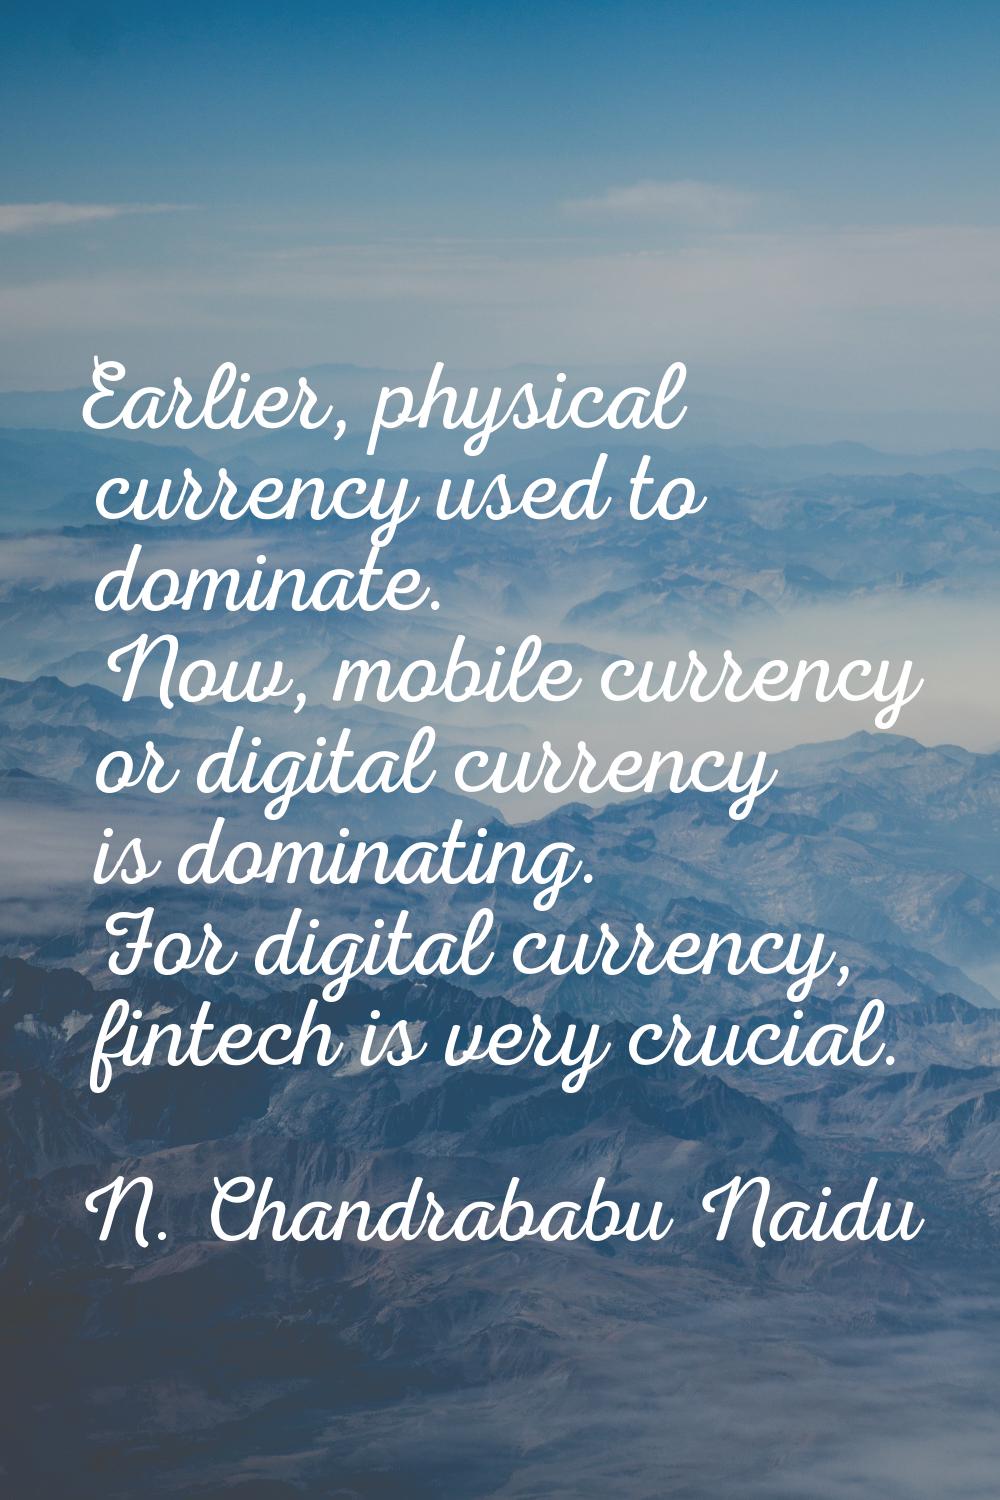 Earlier, physical currency used to dominate. Now, mobile currency or digital currency is dominating